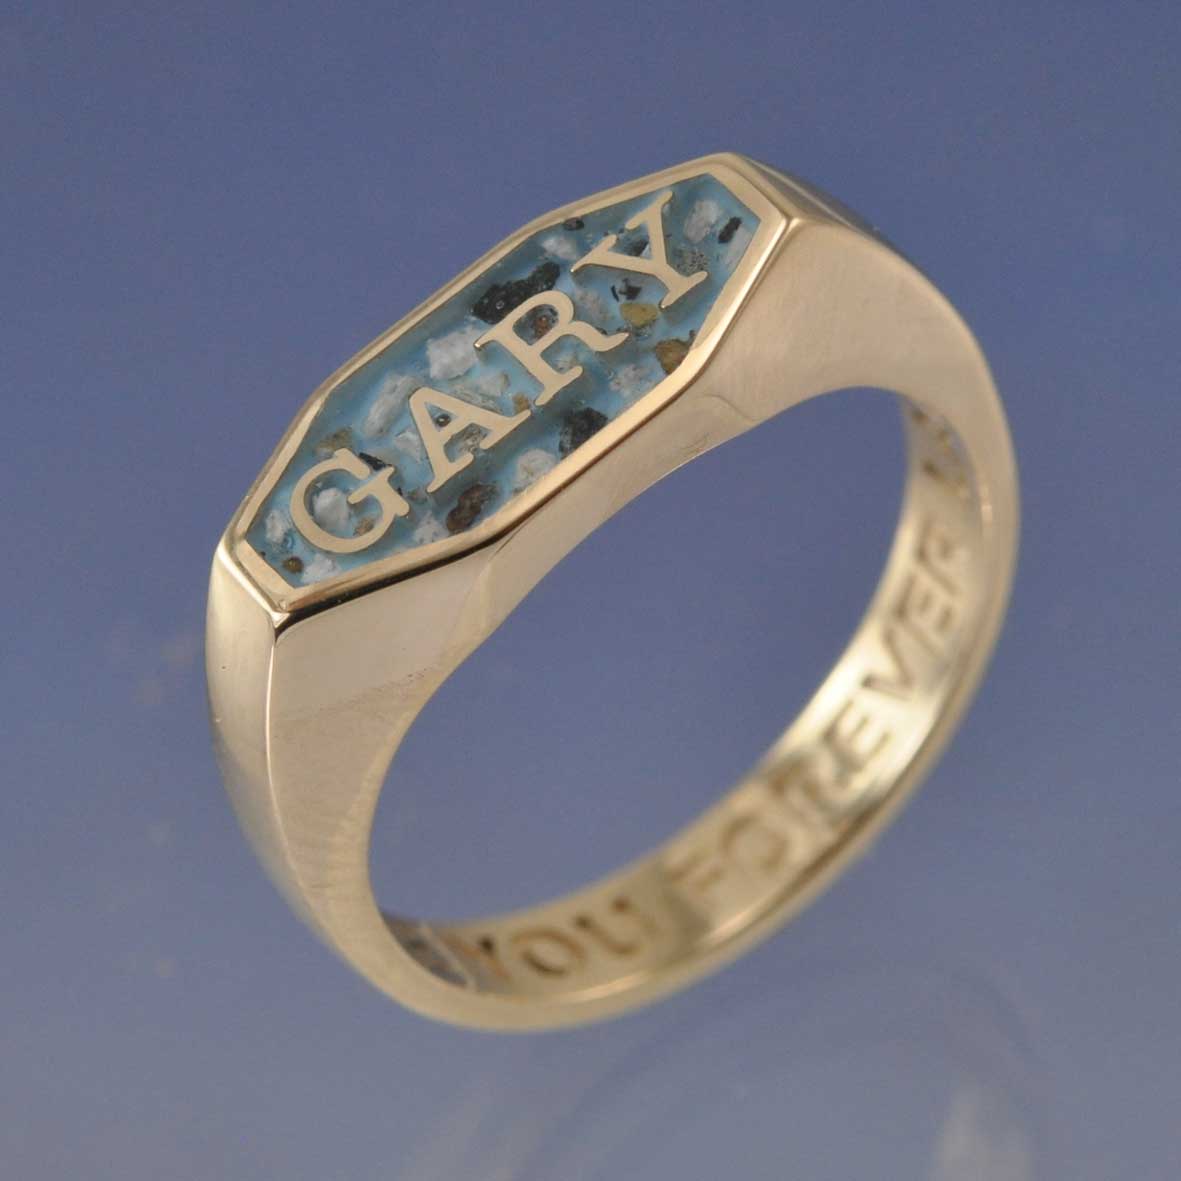 Cremation Ash Ring - Name Signet Ring by Chris Parry Jewellery